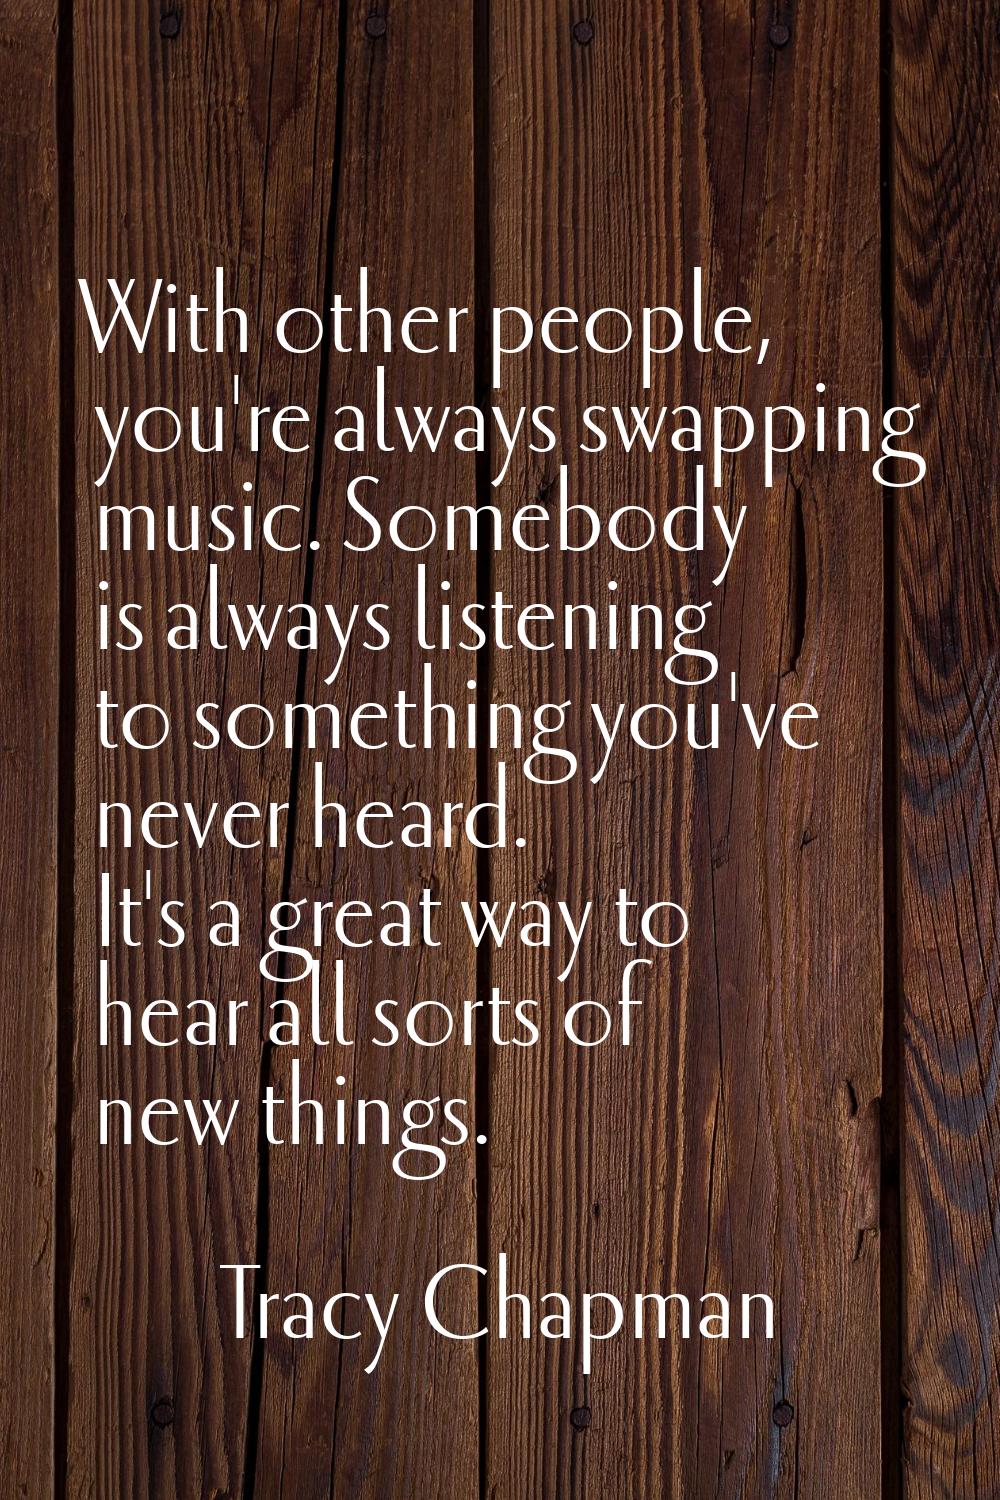 With other people, you're always swapping music. Somebody is always listening to something you've n